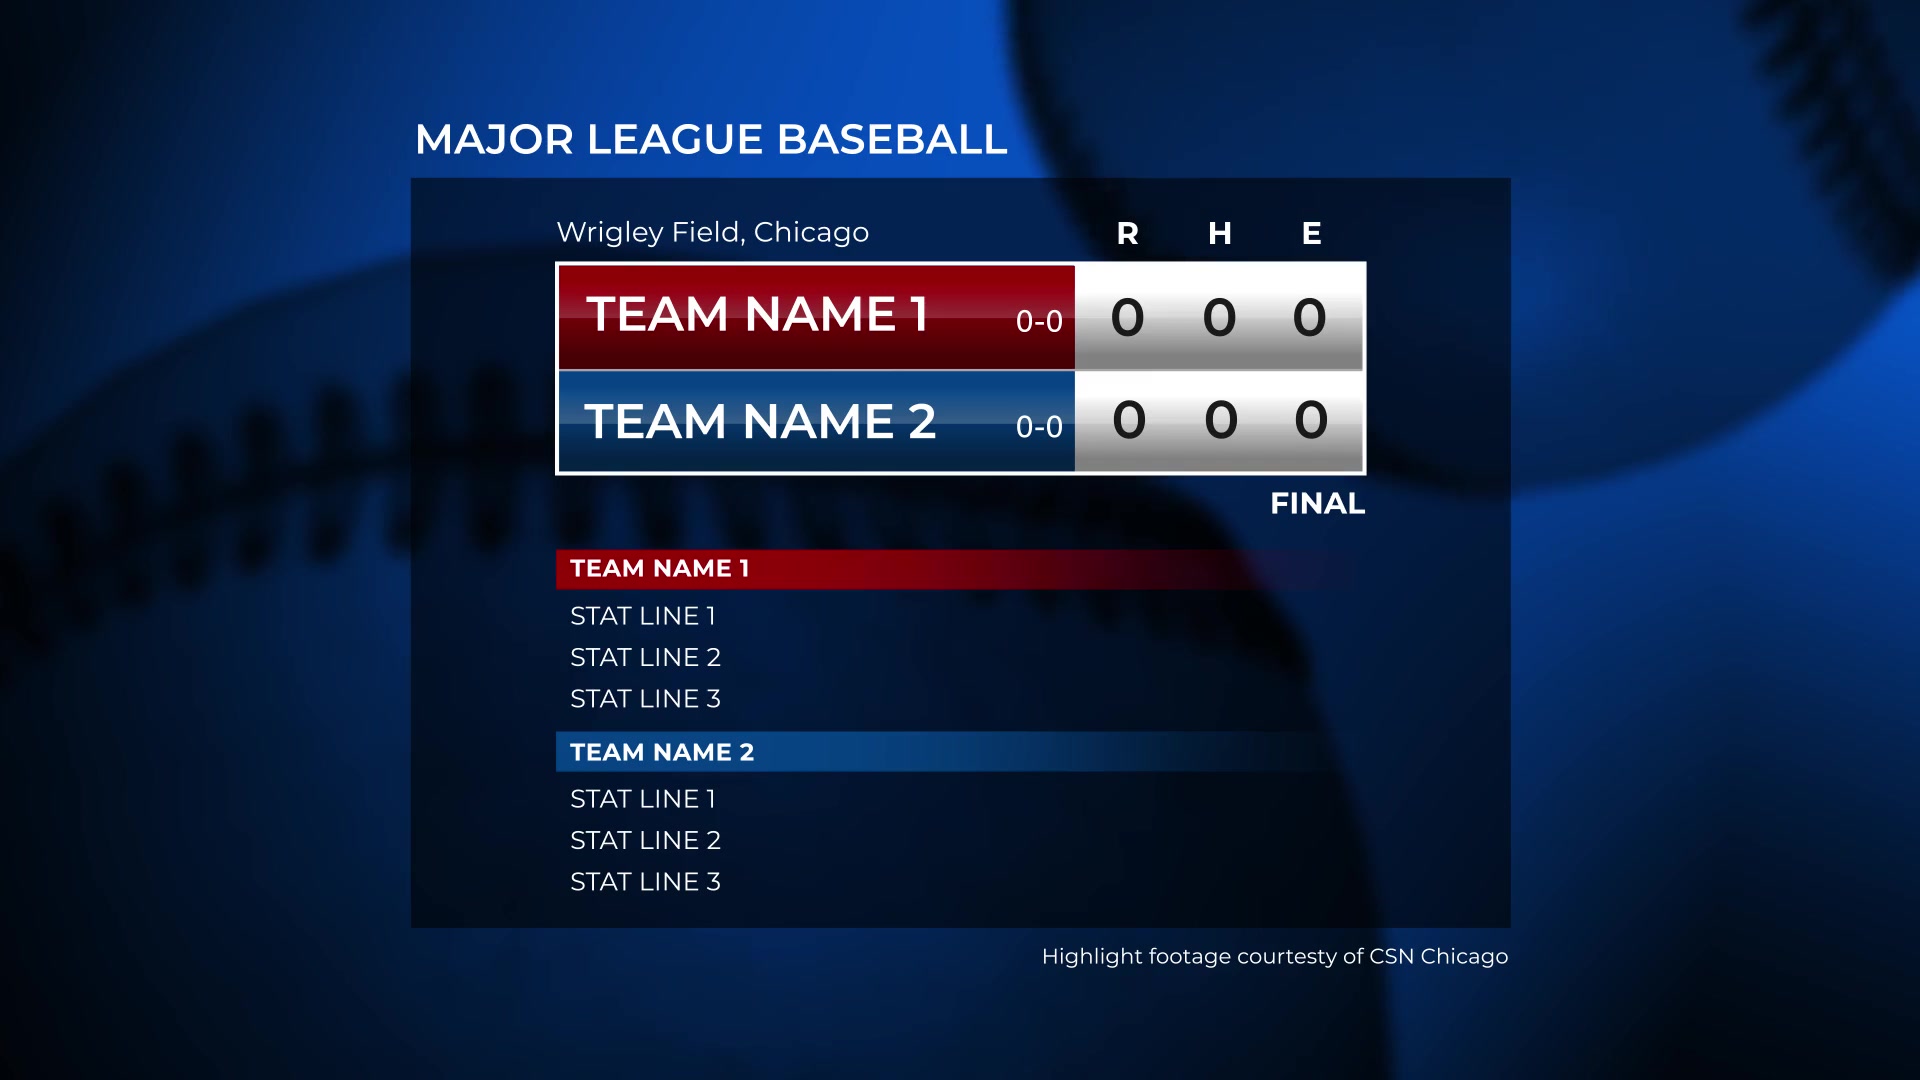 Baseball Tonight Graphics Package - Download Videohive 21981457